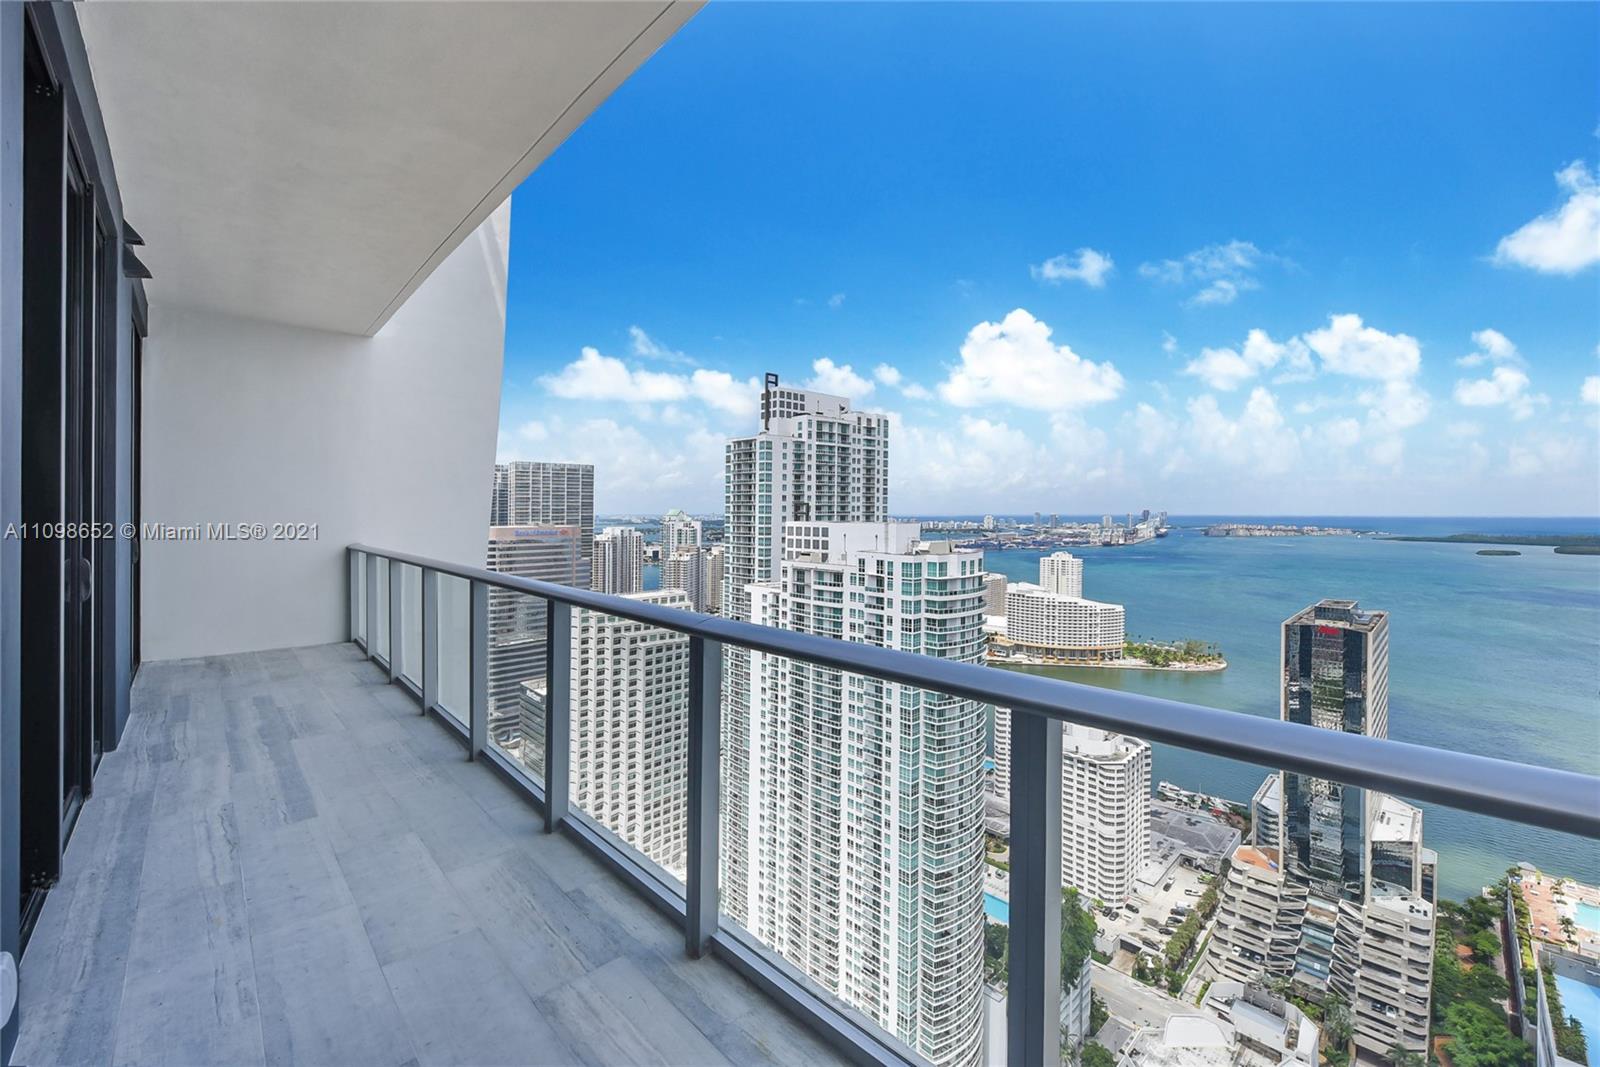 BACK IN MARKET...2 bed + DEN unit, centrally located in the most amazing condo in the Brickell area, LOTS of amenities for residents ONLY. Private elevator, breathtaking ocean + city views. Unit rented until 12/22/2021 Lower penthouse with 2 feet higher ceilings than regular apartments in the building!!